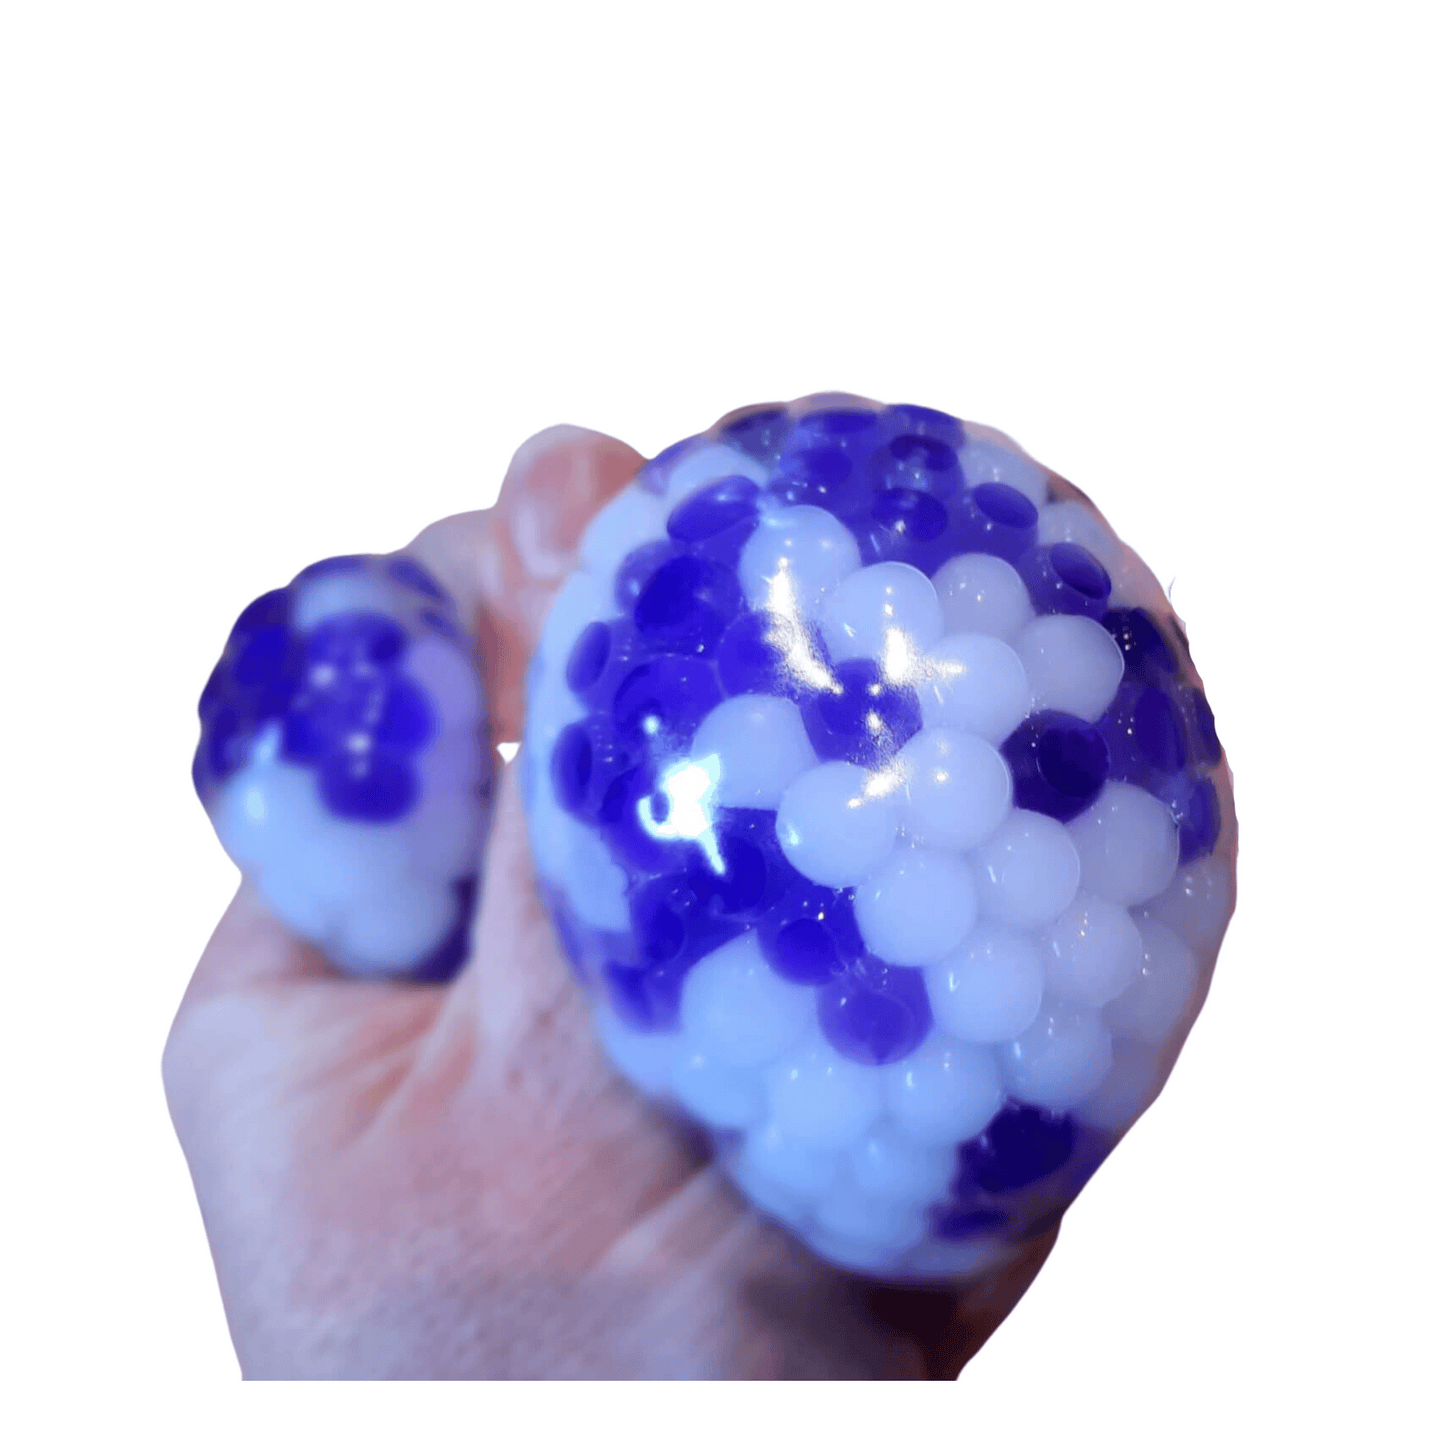 Two toned water orbs squishy ball blue